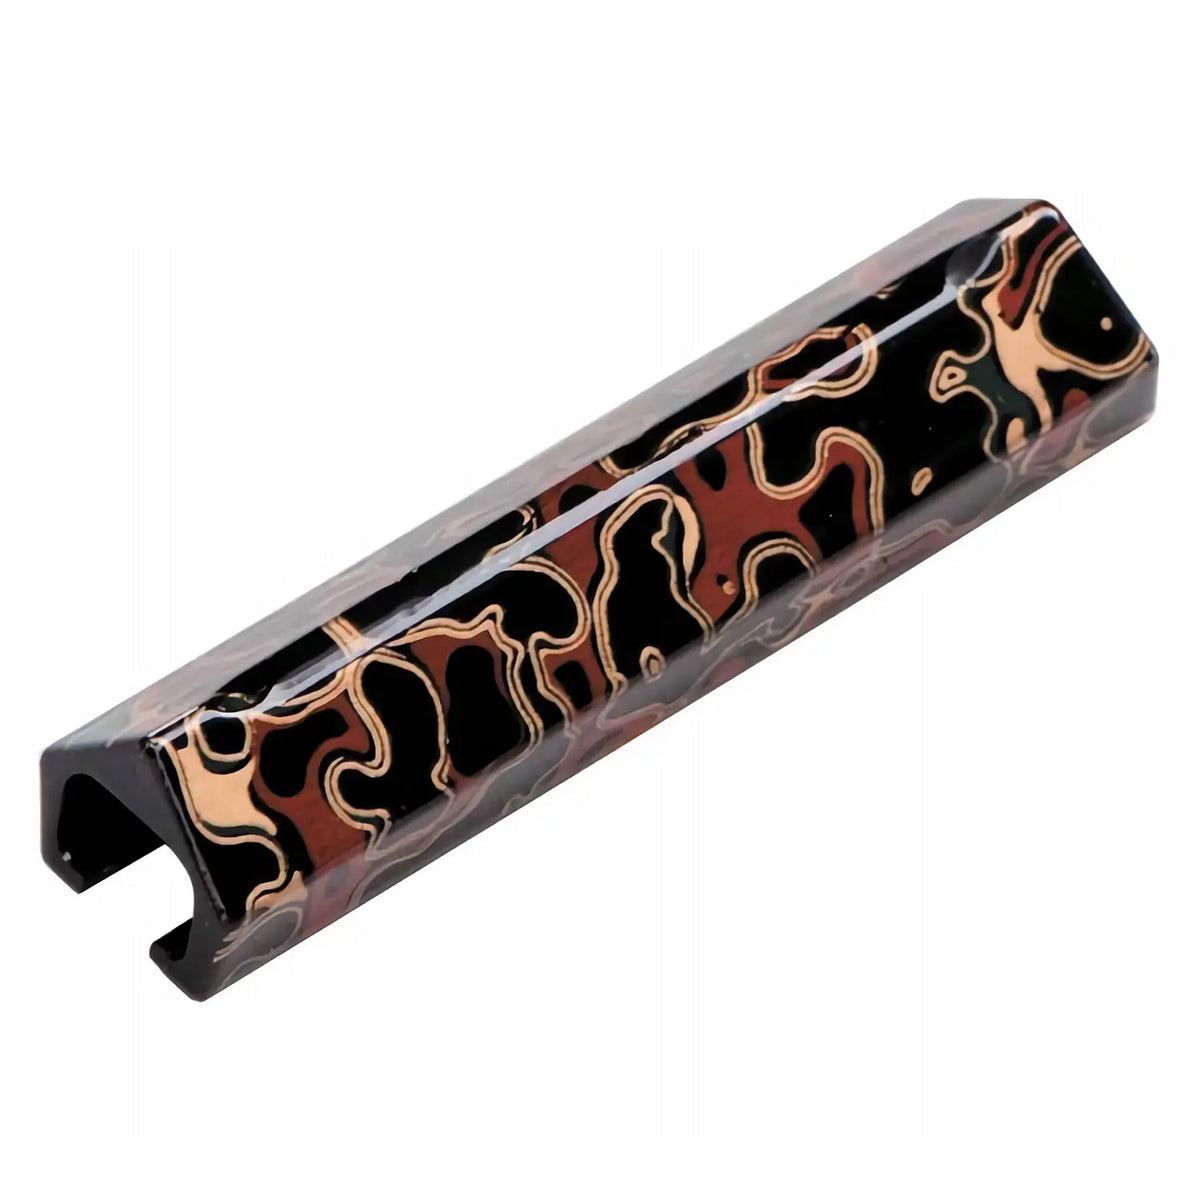 WAKAIZUMI ABS Resin Multi-Purpose Cutlery Rest Red Lacquer Marble